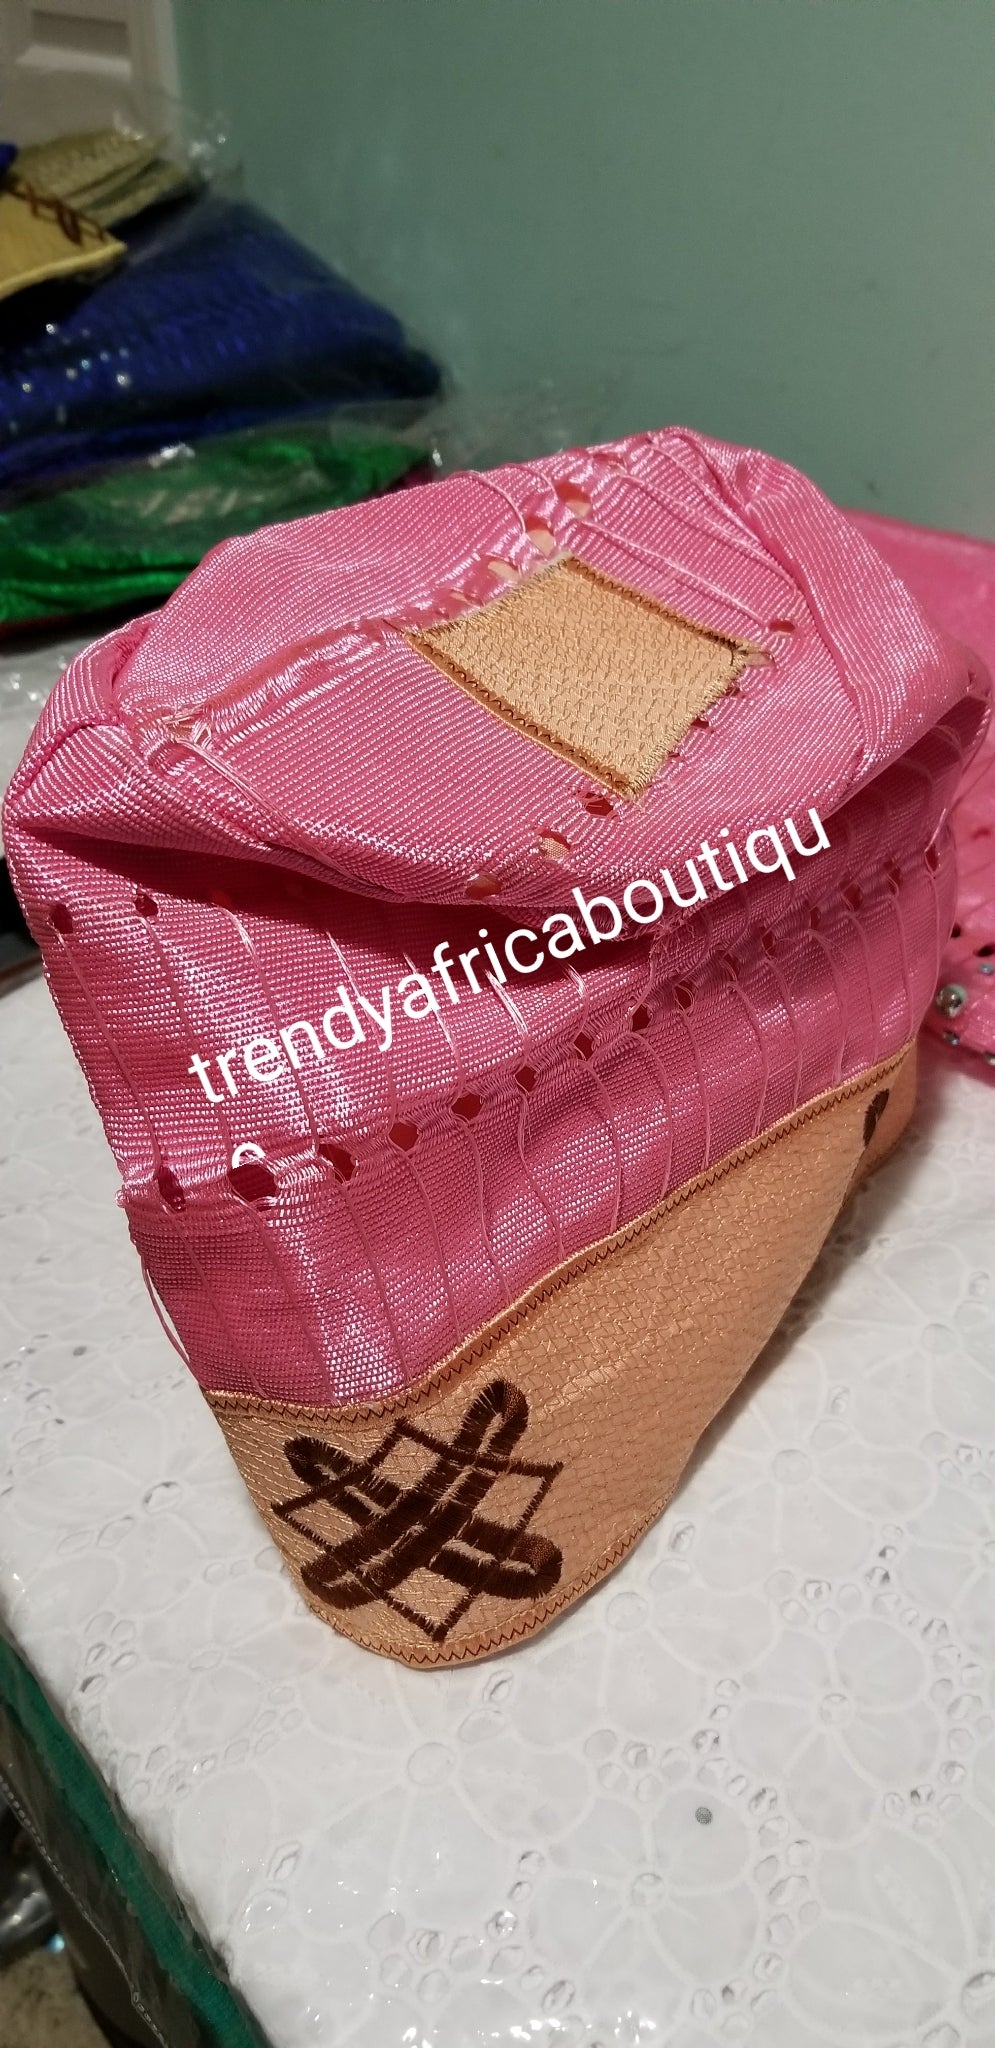 New arrival Nigerian  men-cap for Agbada native wear.  Embroidered  Aso-oke cap  in pink color size 22 inch